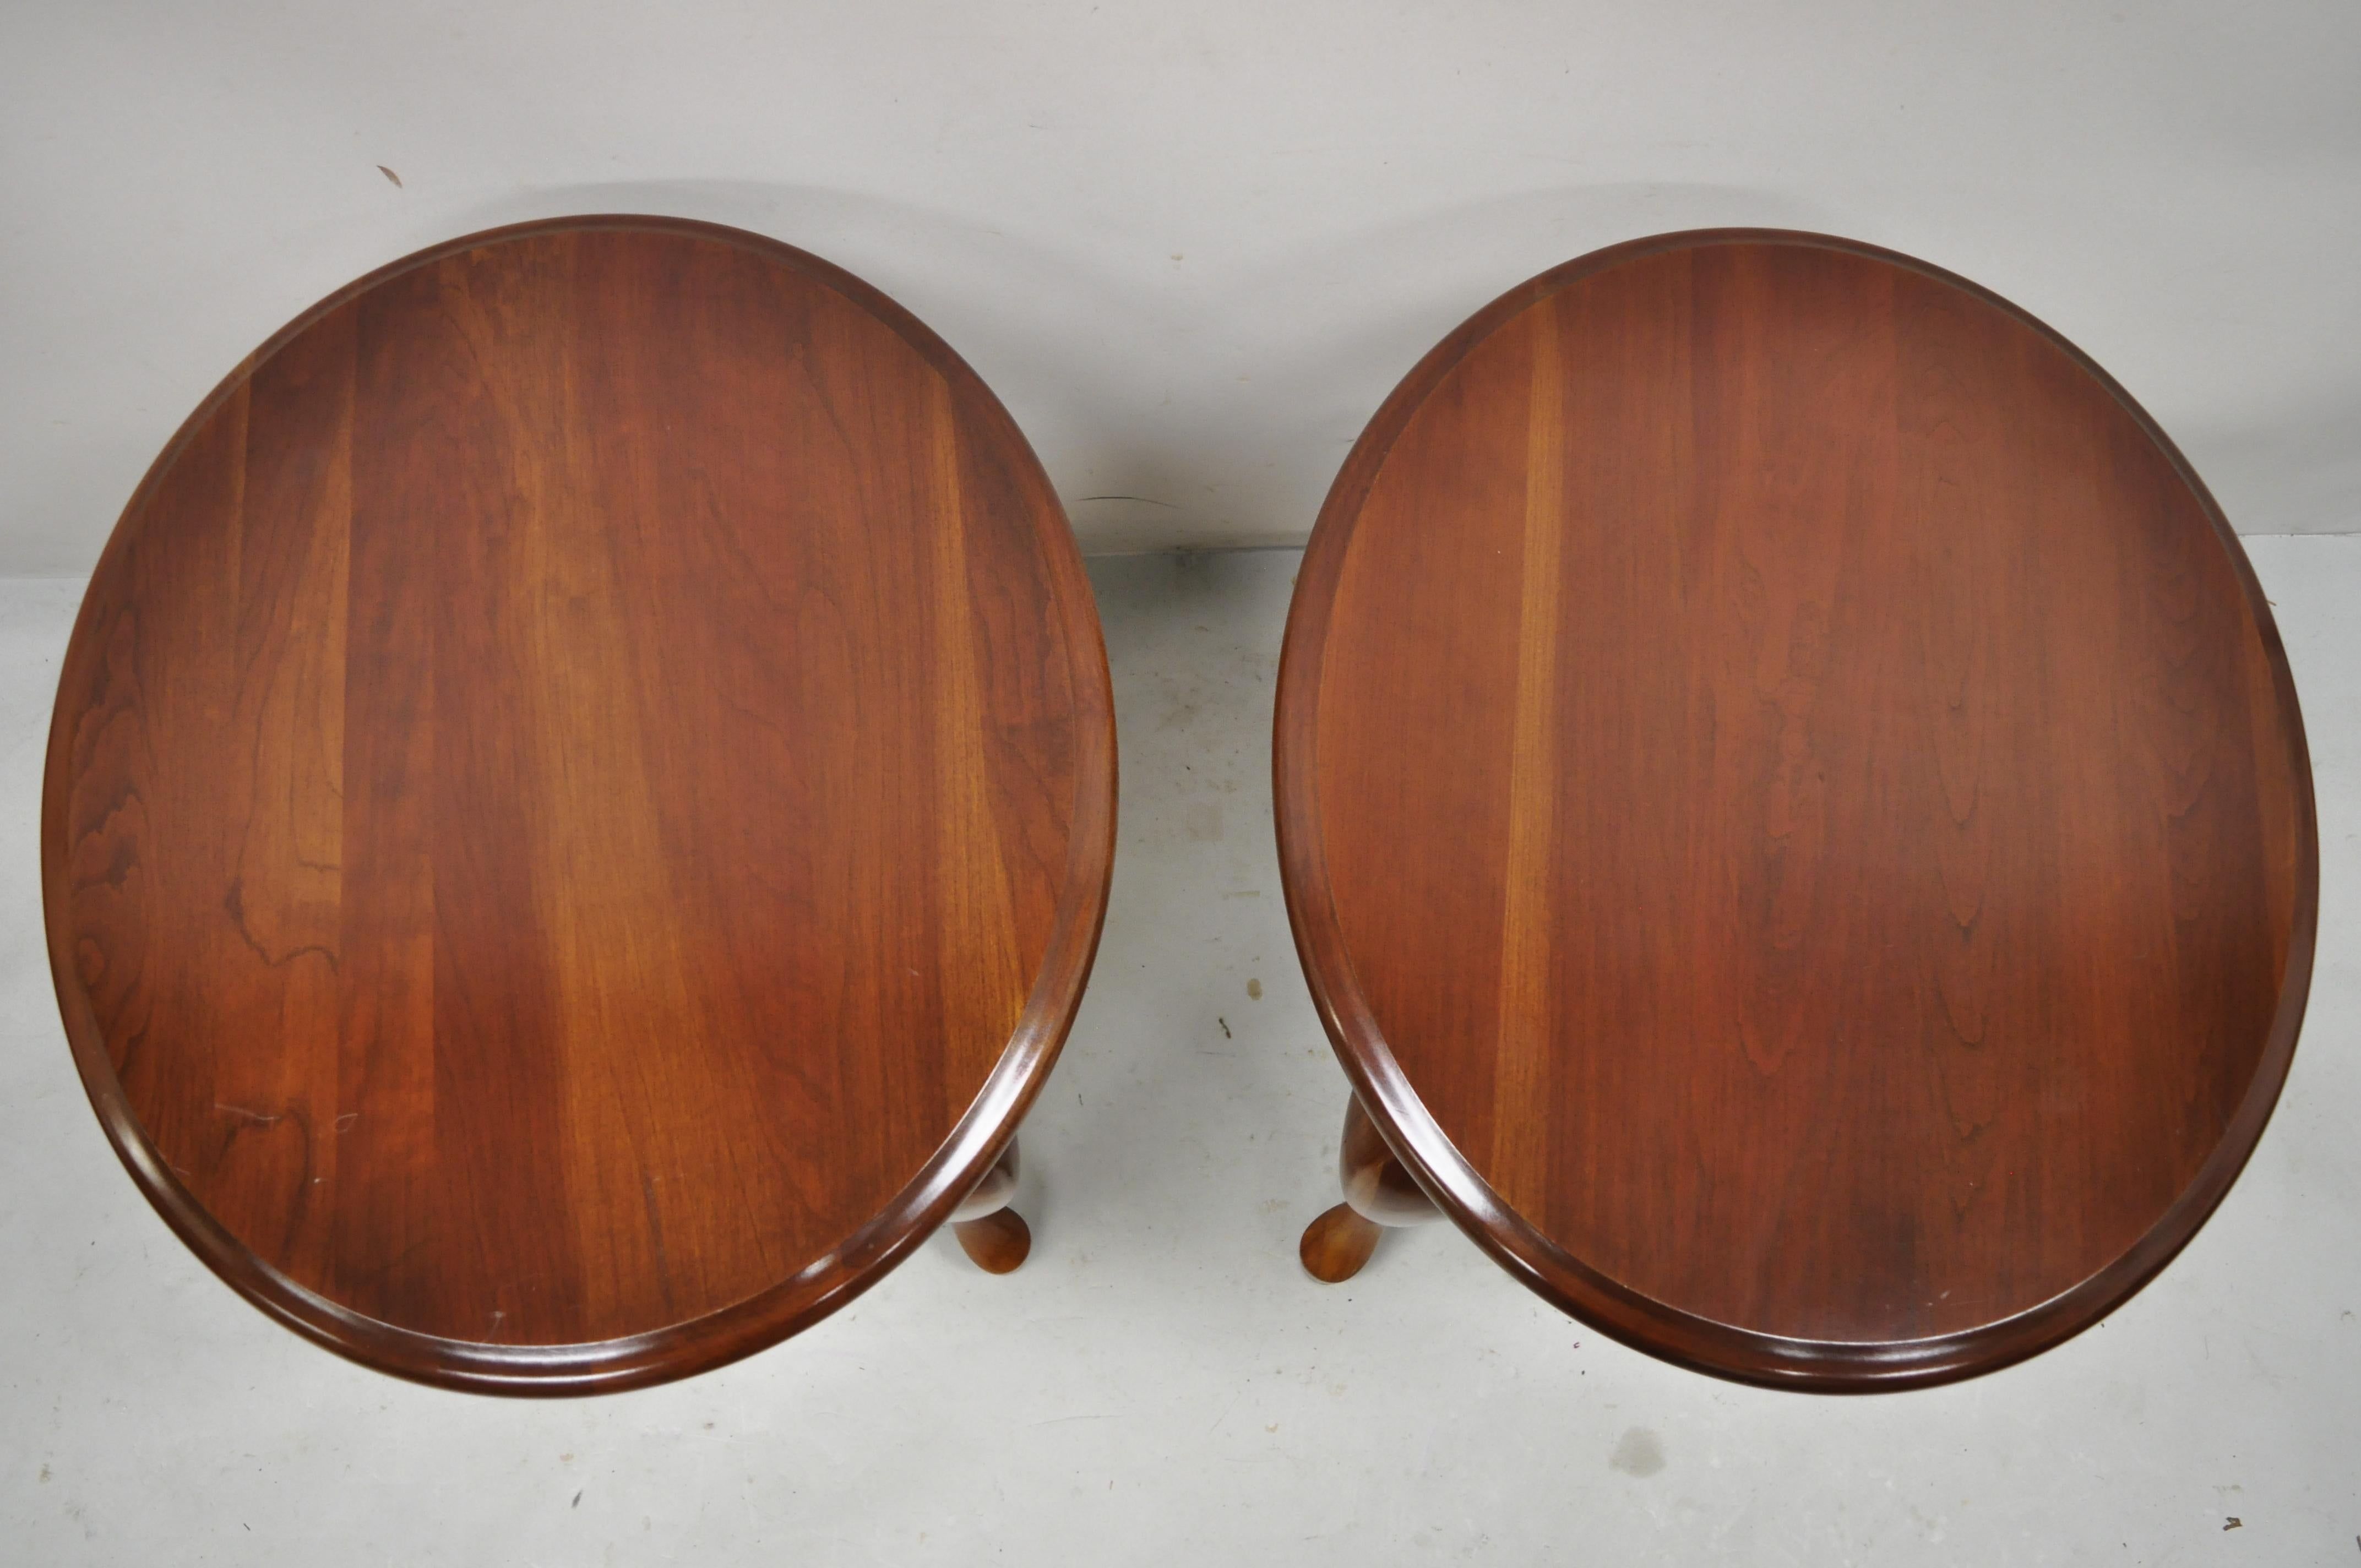 North American Cherry Wood Queen Anne One Drawer Oval Lamp Side End Tables, a Pair